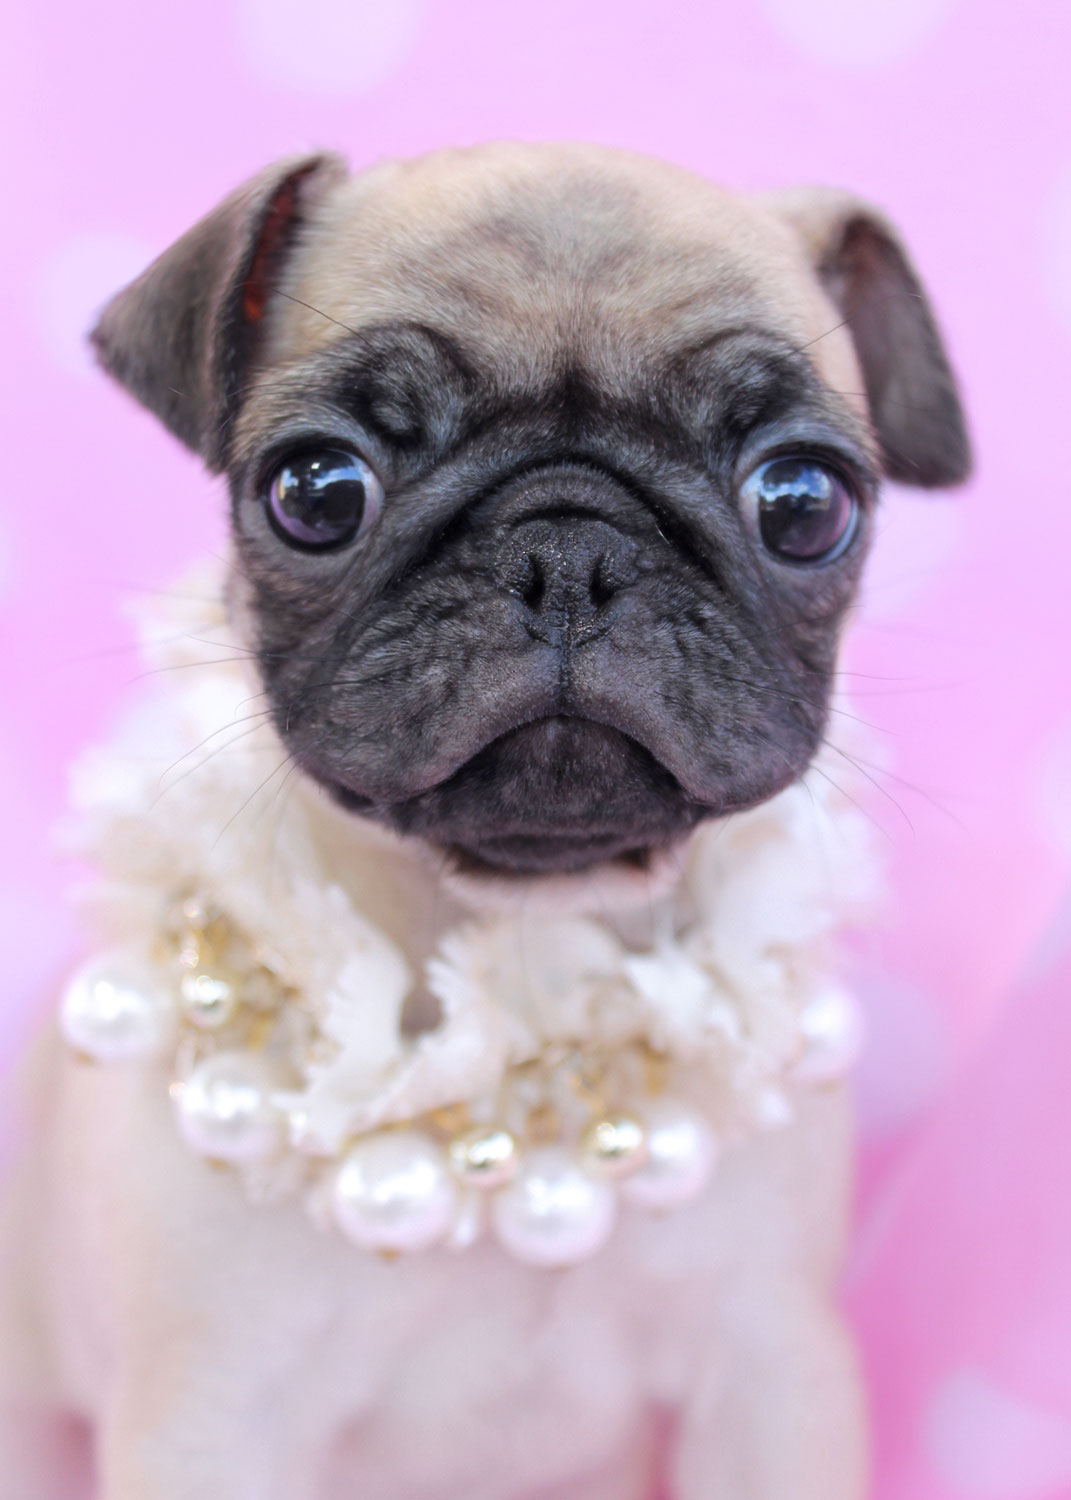 Pug puppies can be intimidating at first, as they seem to small, cute, and ...